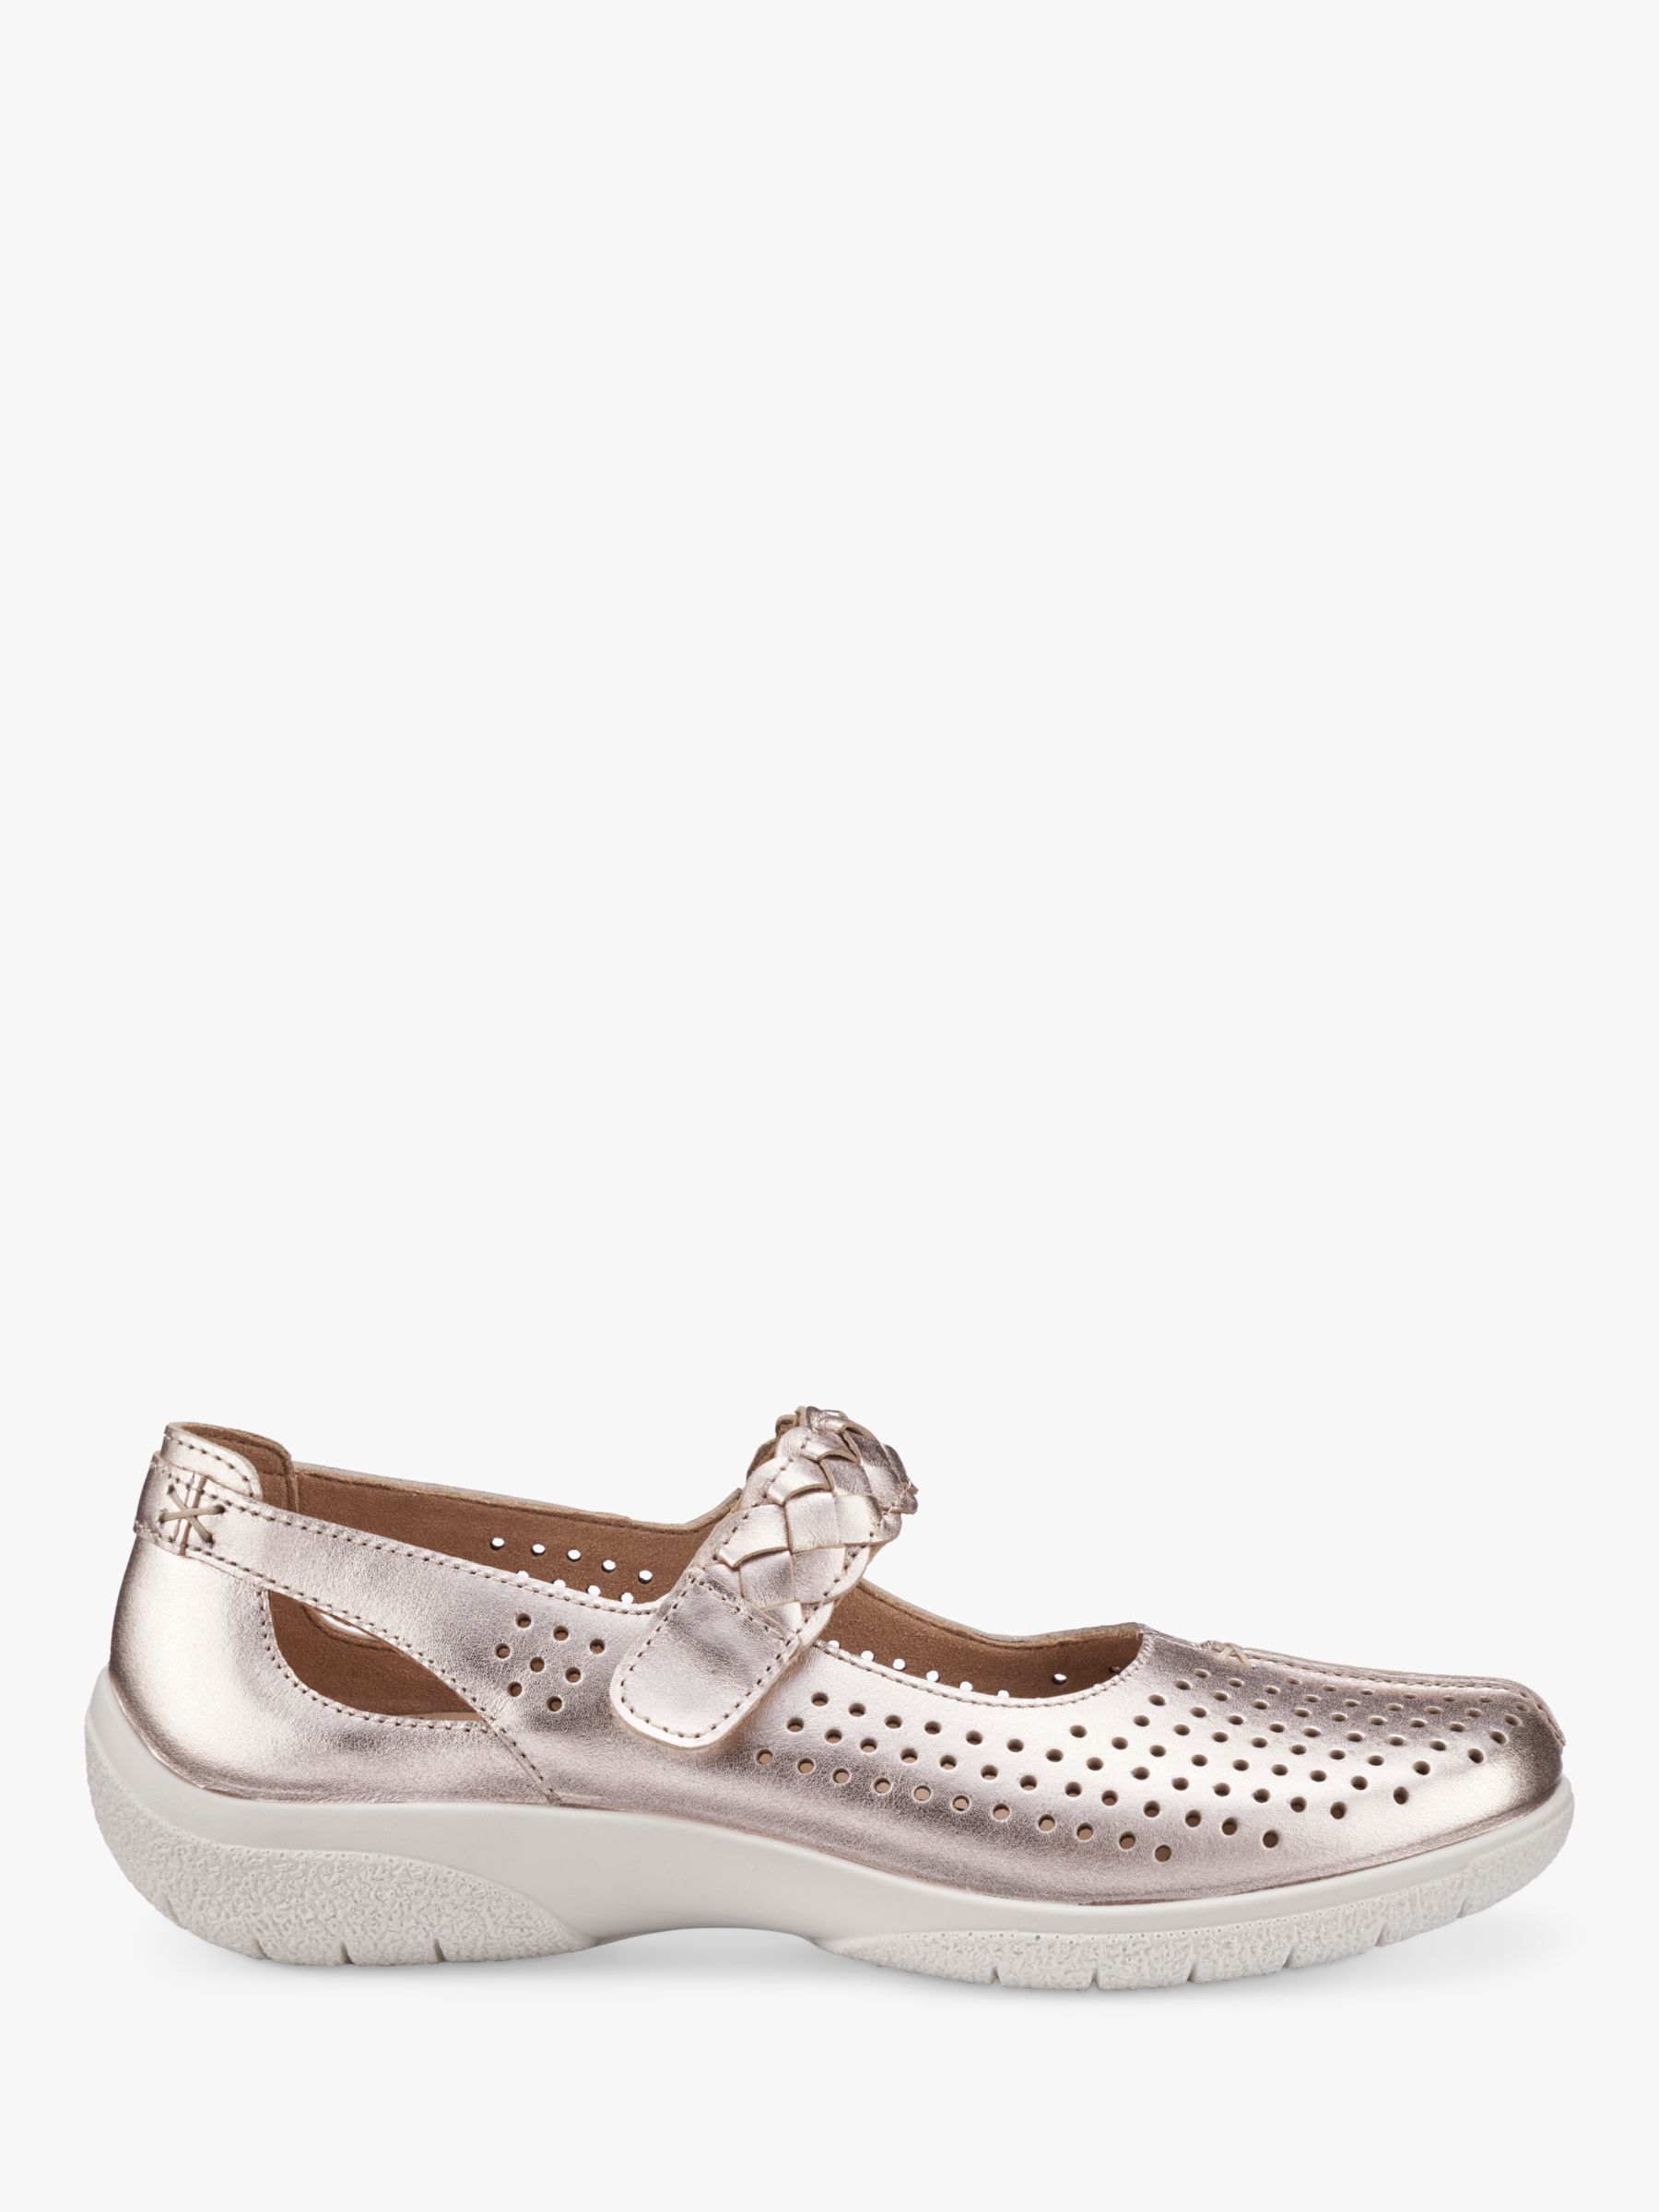 Buy Hotter Quake II Perforated Leather Mary Jane Shoes, Soft Gold Online at johnlewis.com